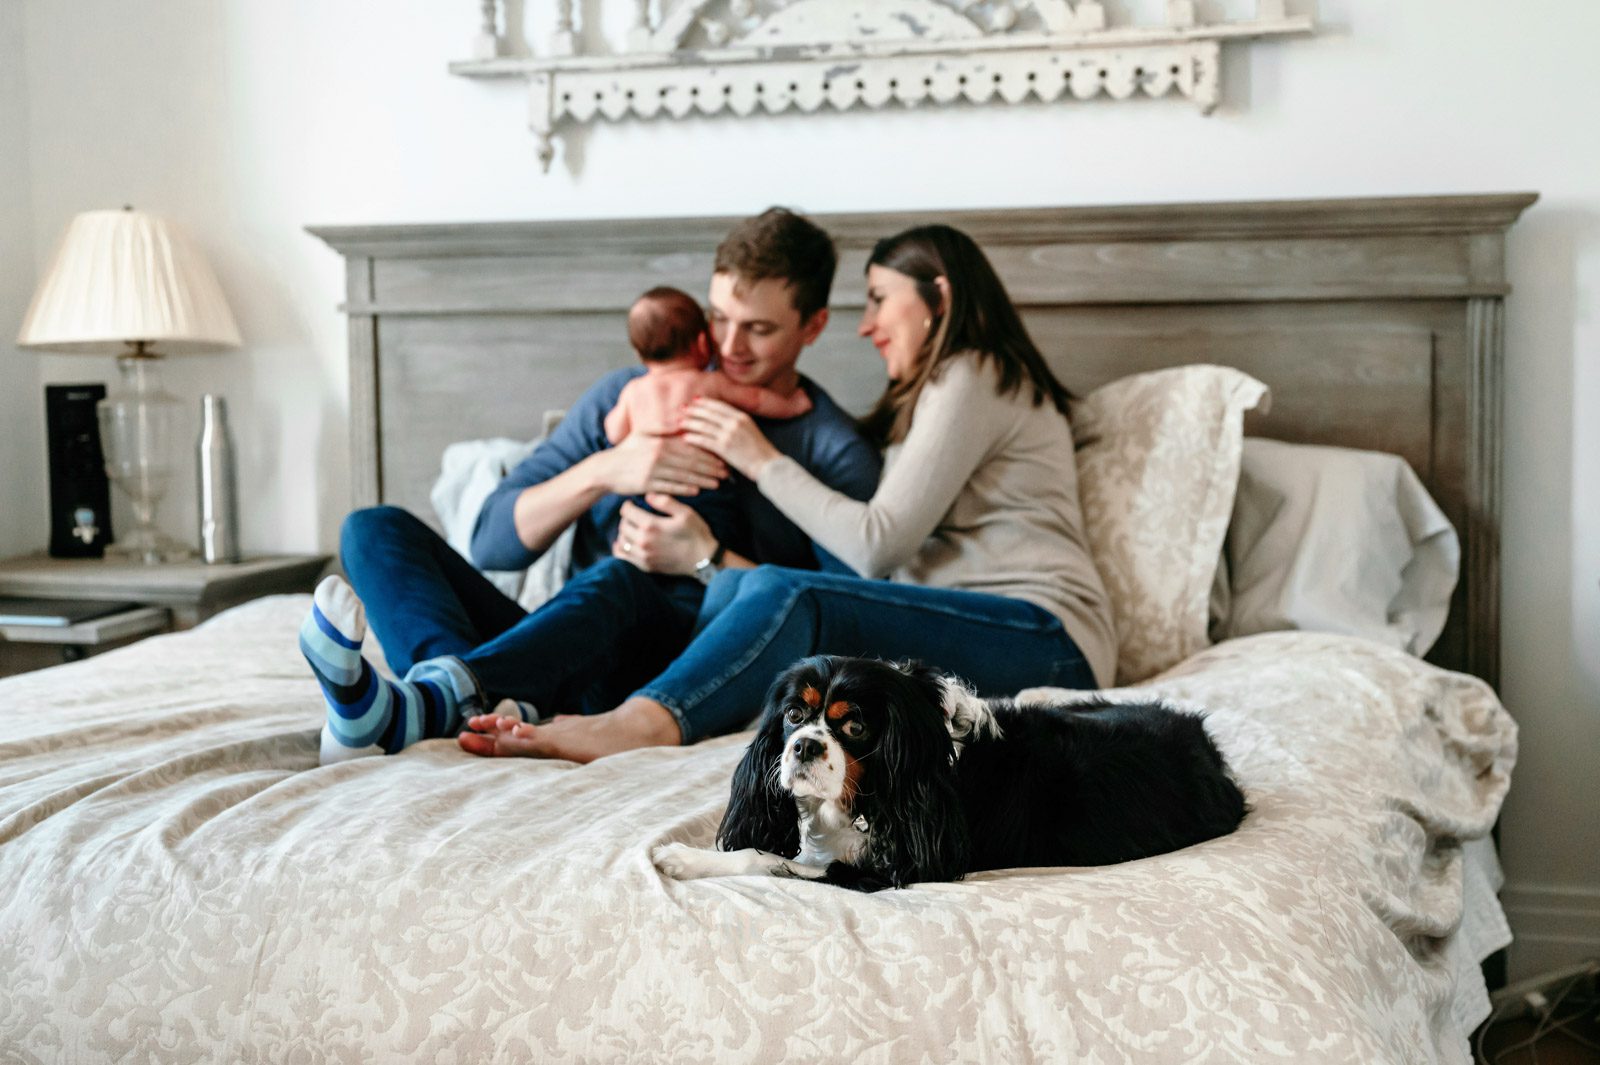 A pet dog laying at the foot of the bed with the parents snuggling their newborn baby boy in the background during a Philadelphia newborn photoshoot